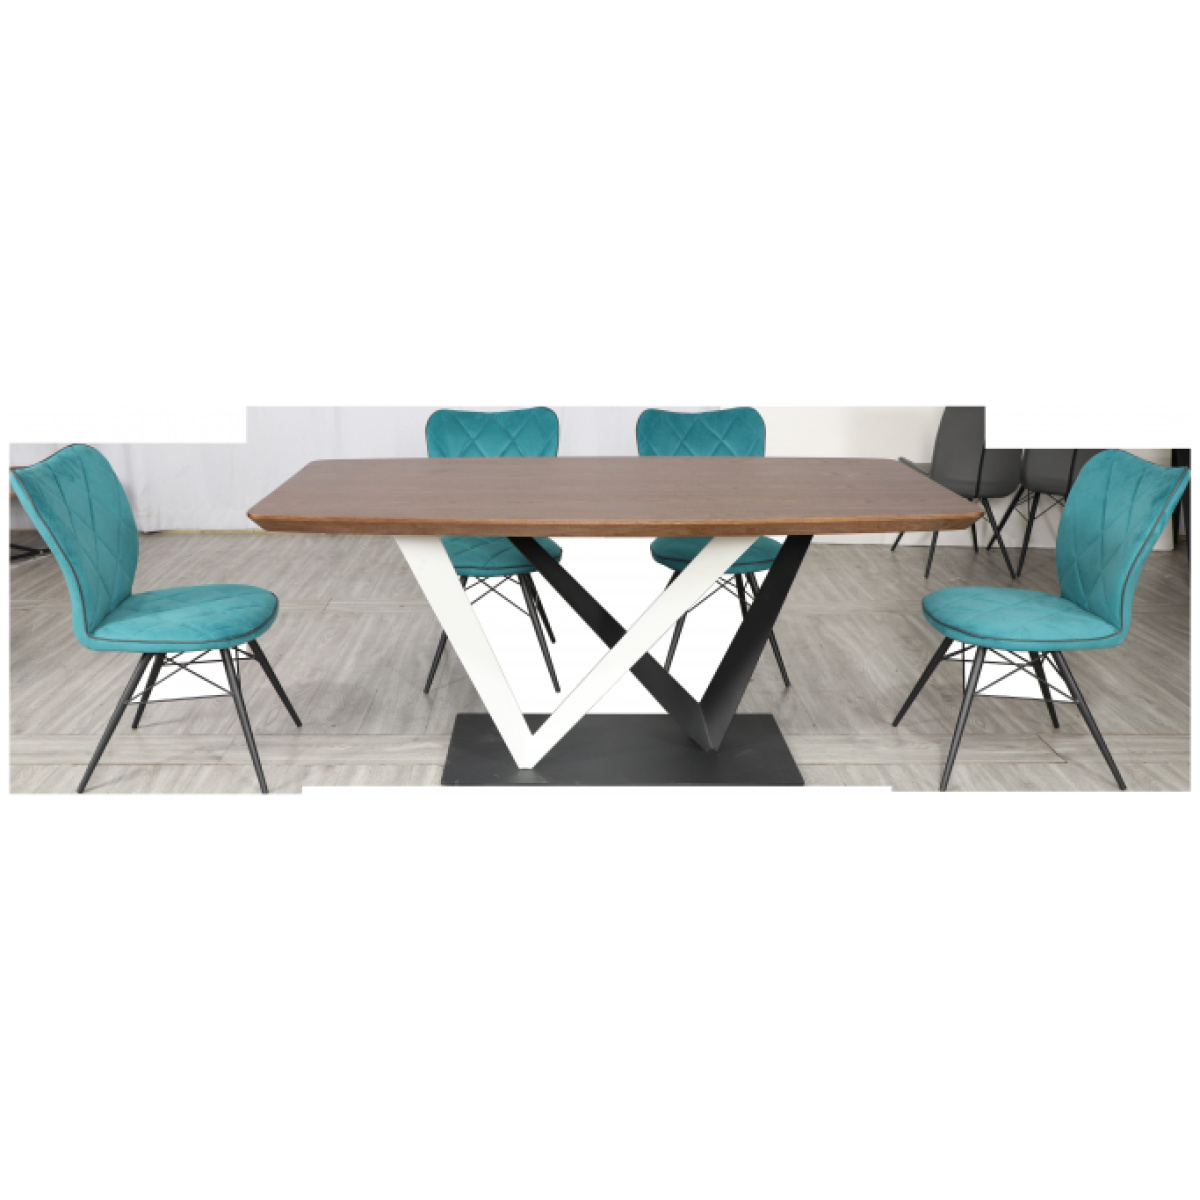 Horse-bellied countertop dining Table(BF172-B18)